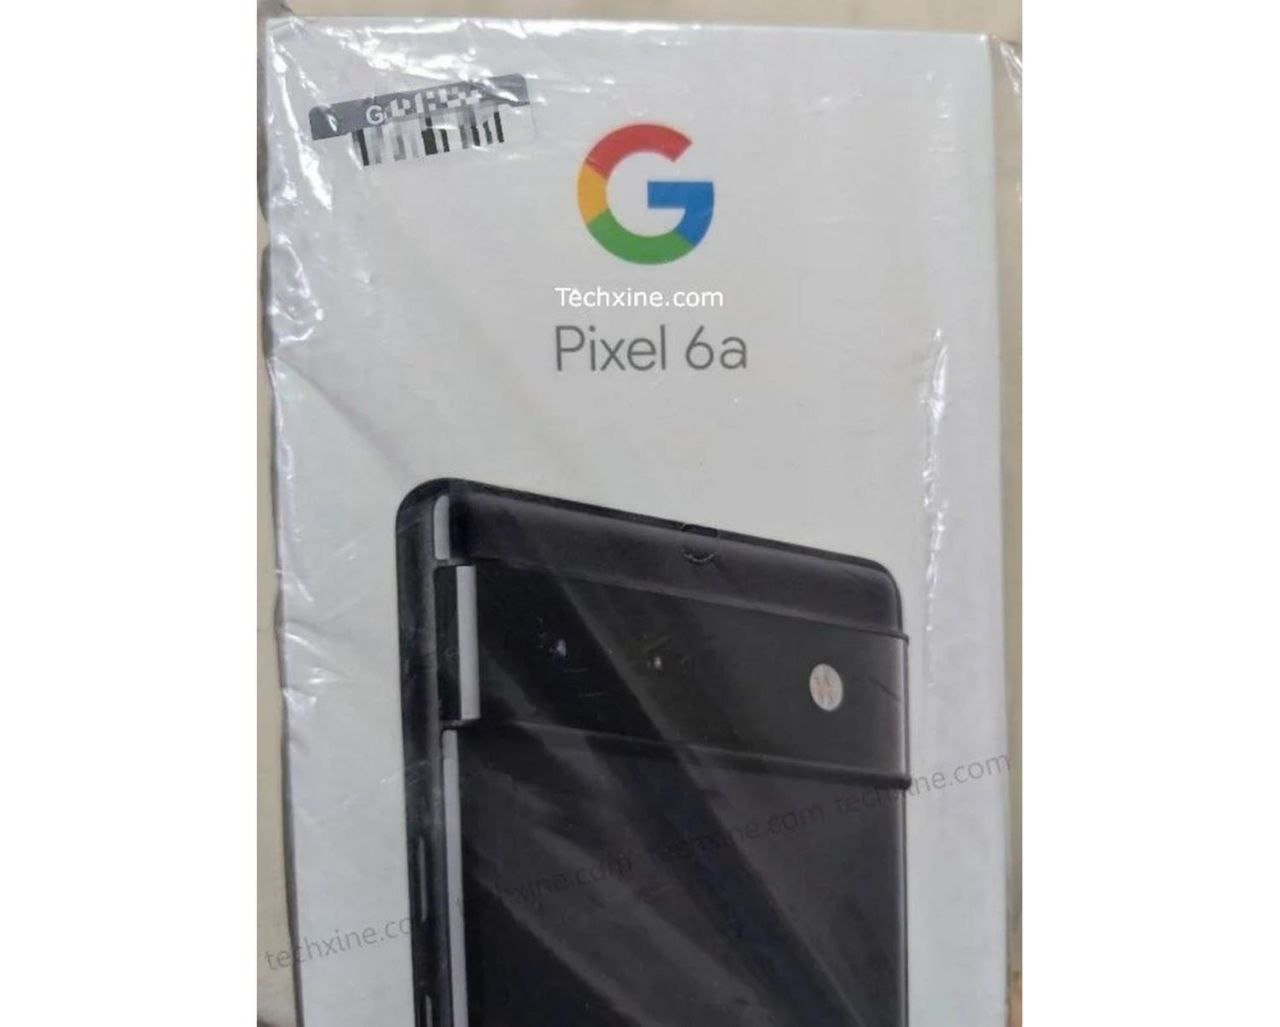 Pixel 6a Launching in India on 11th may 2022